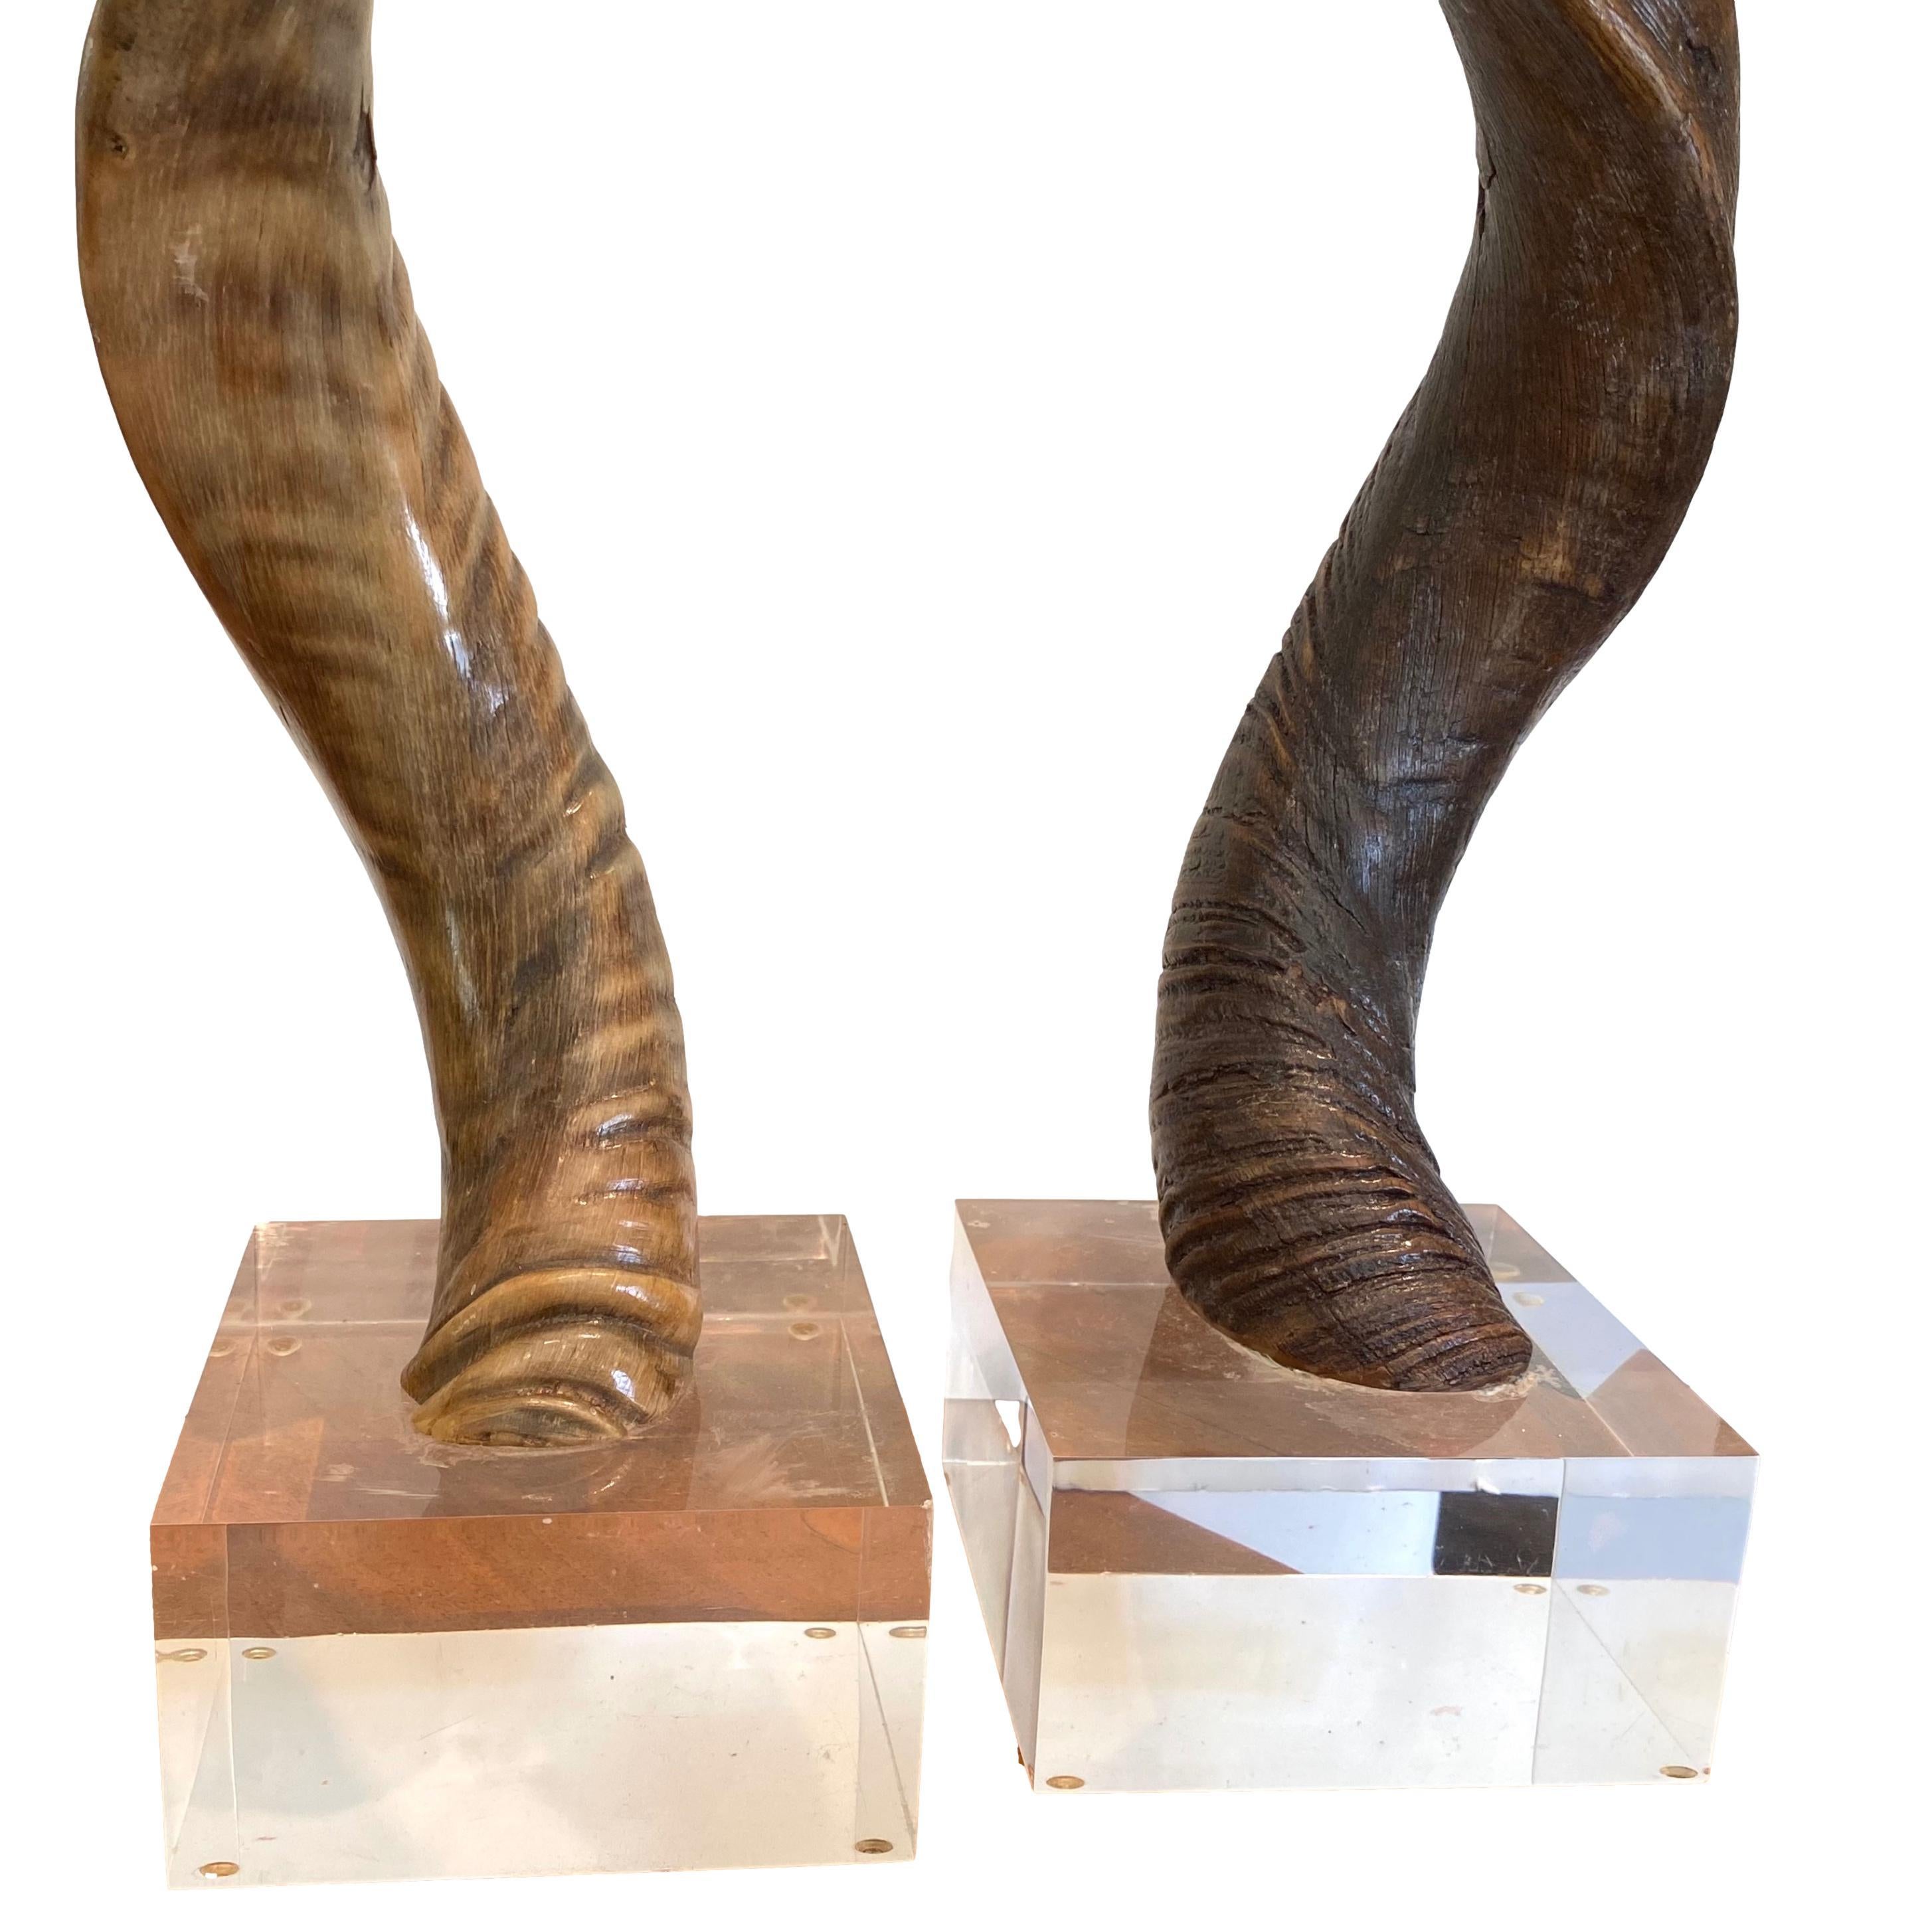 Pair of mounted Kudo horns on lucite blocks....

Two pieces measure:
33